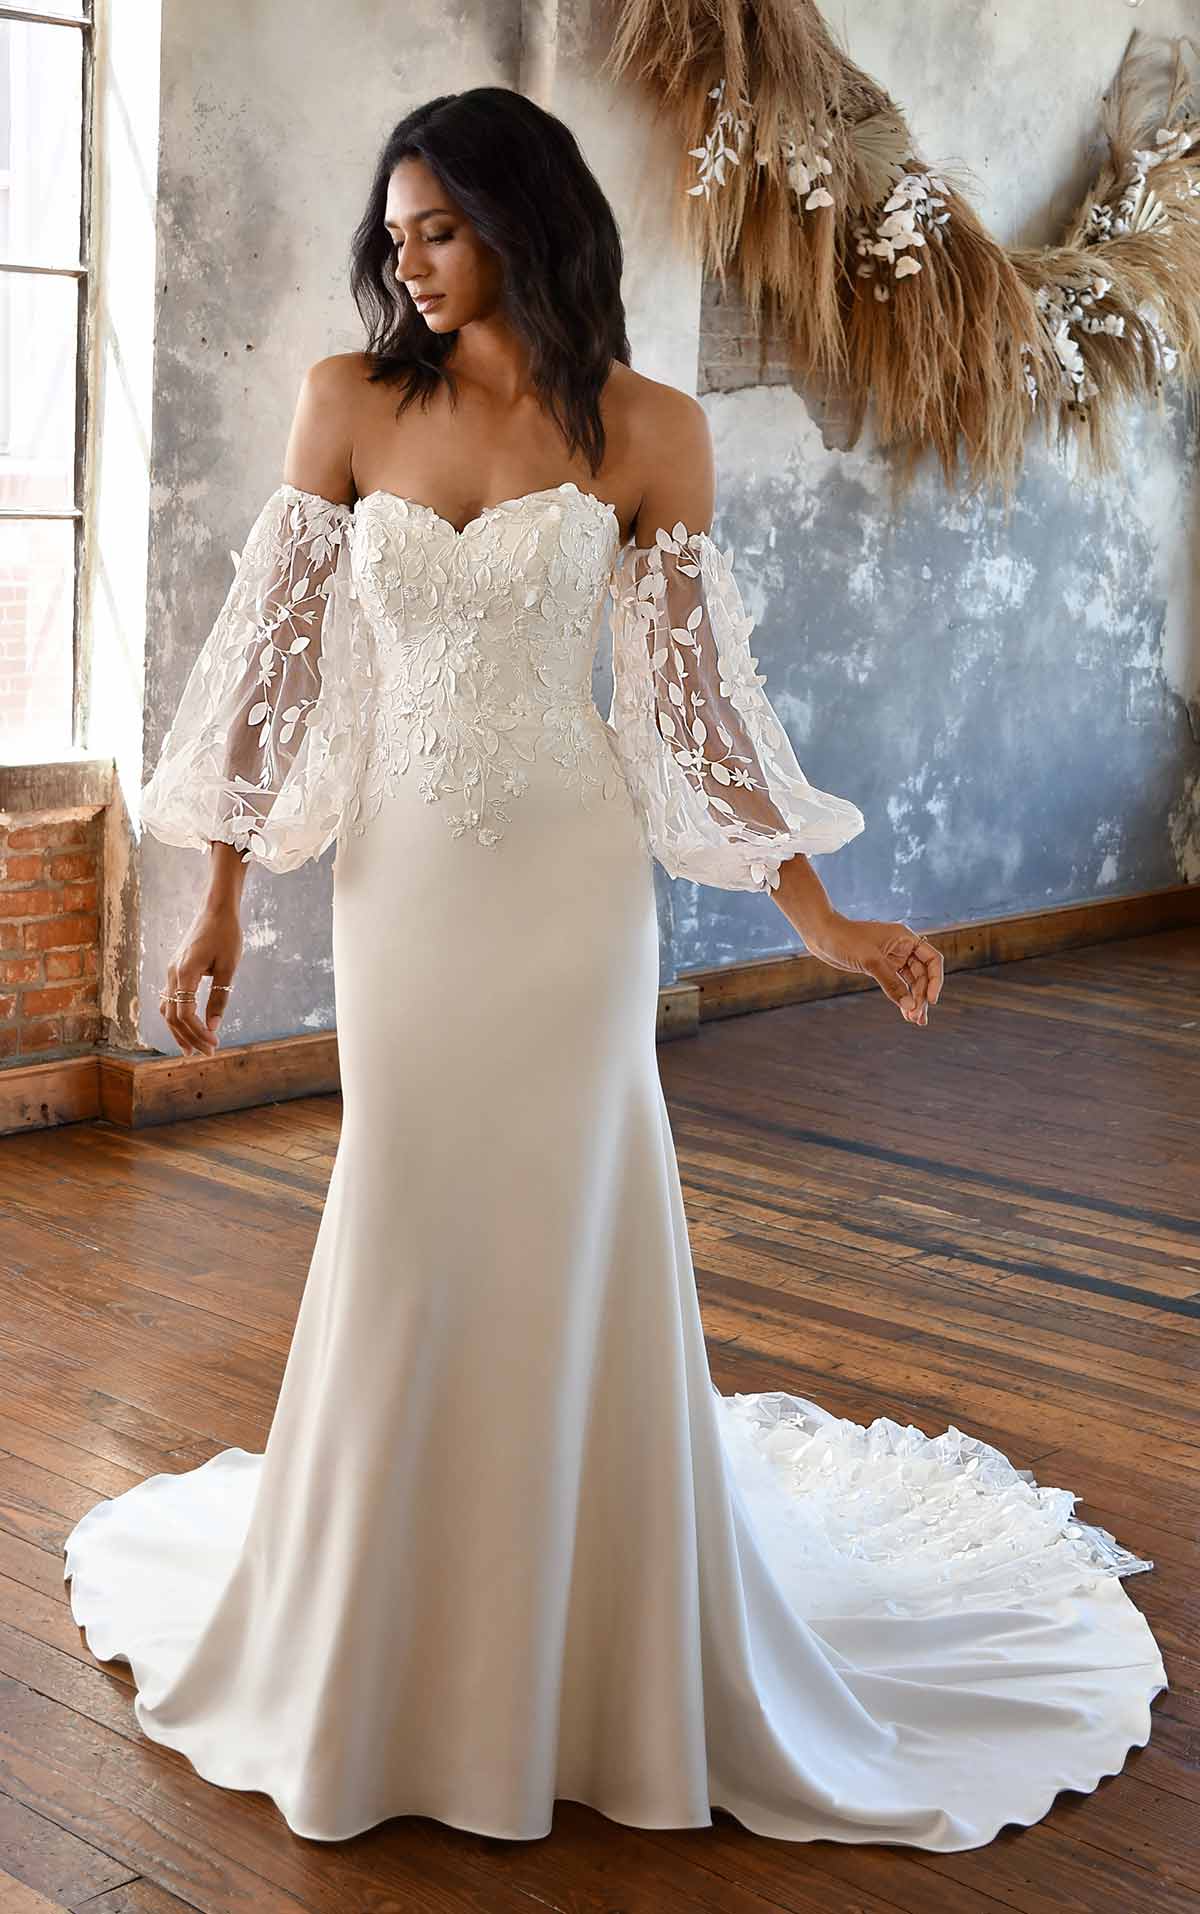 Fit And Flare Lace Wedding Dress With Vintage Details.